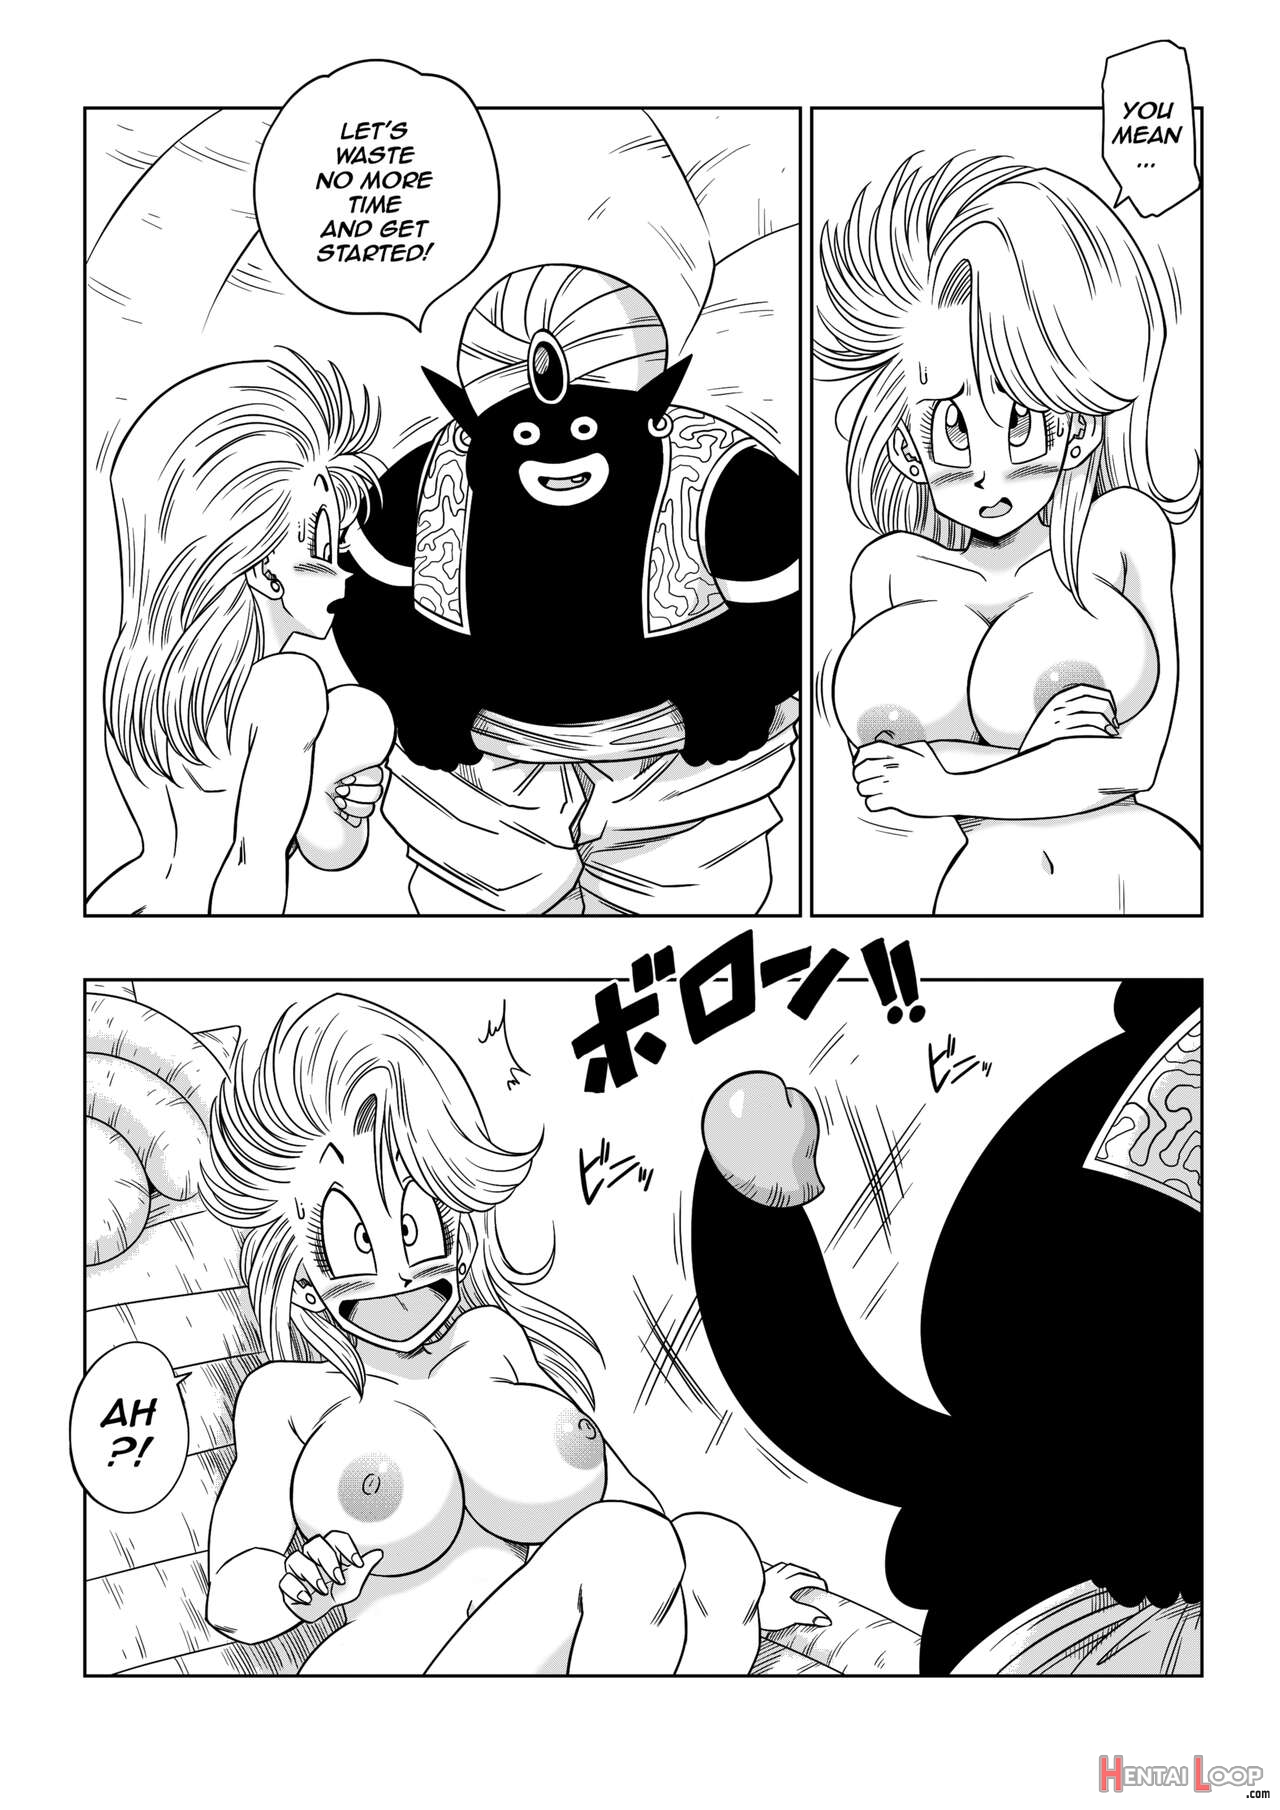 Bulma Meets Mr.popo - Sex Inside The Mysterious Spaceship! page 8